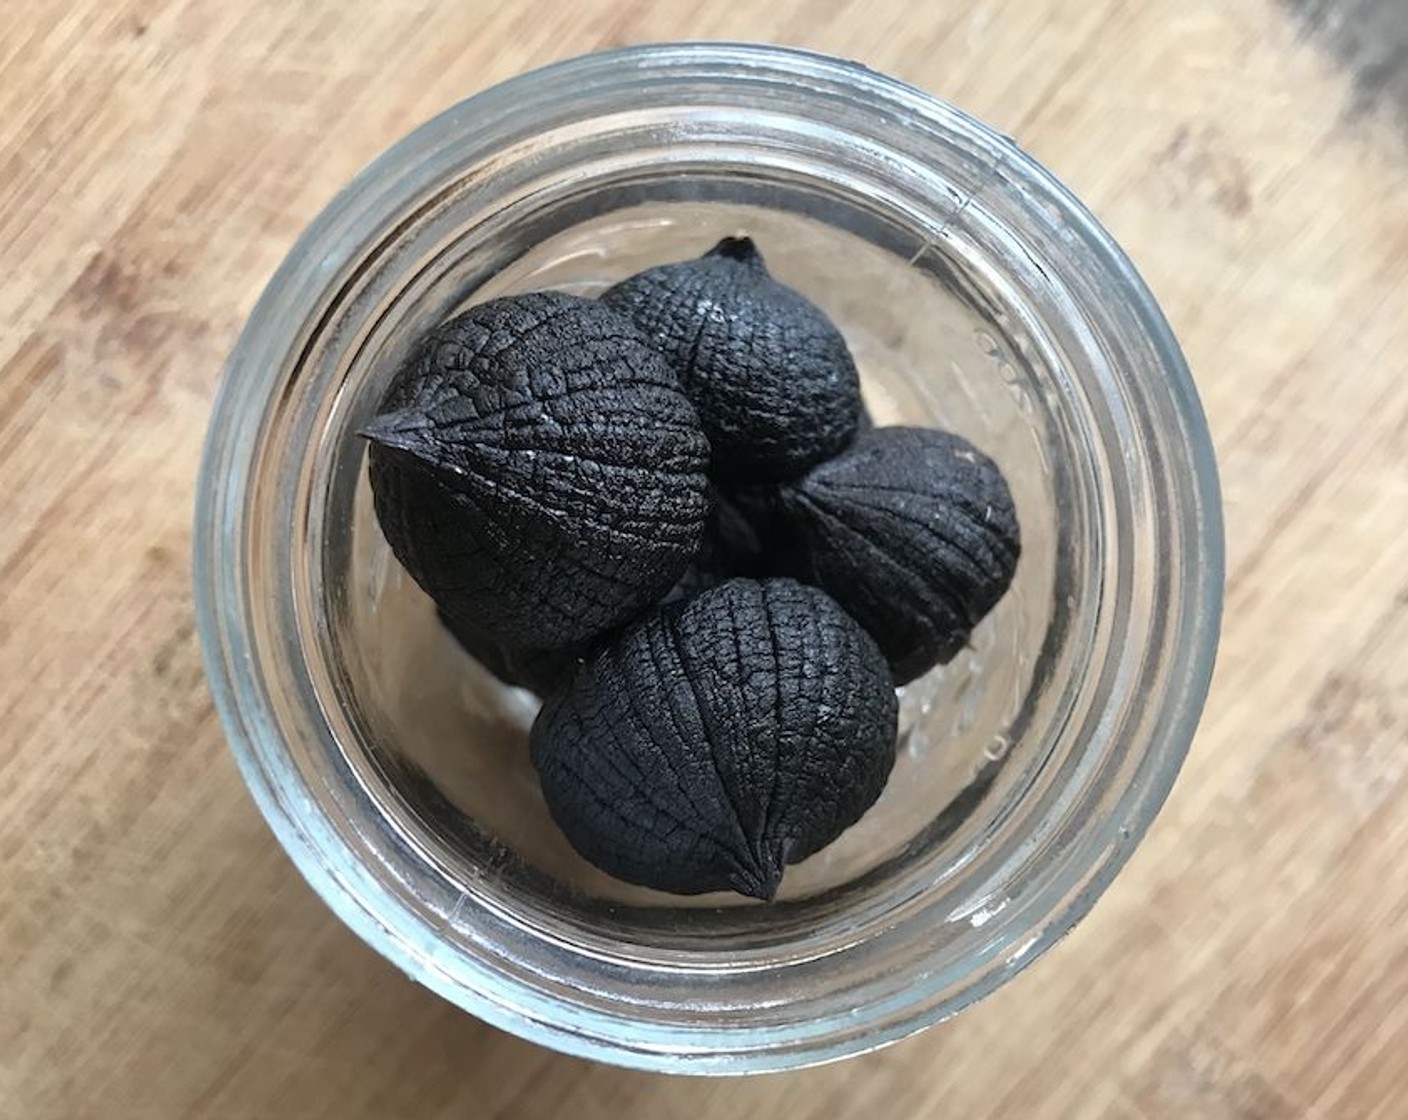 step 5 Enjoy your black garlic! Stored in an airtight container, it will keep for up to 6 months in the fridge. Peel it all at once if you want to take a pretty picture, otherwise just peel the cloves as needed.